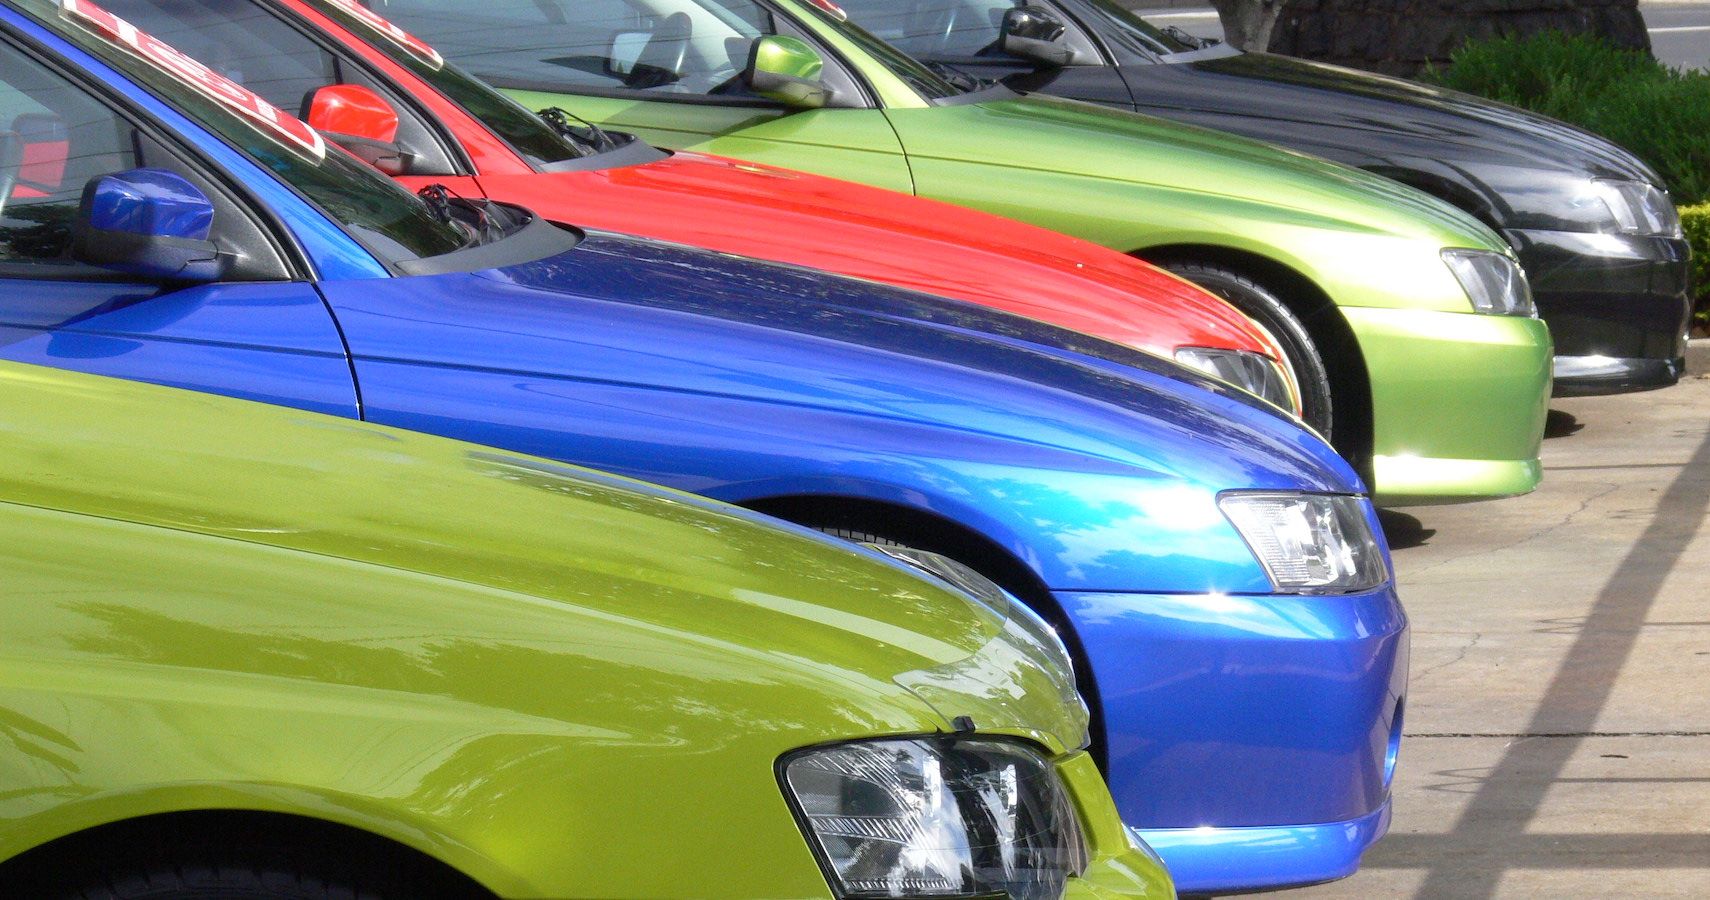 Colorful Cars Lined Up